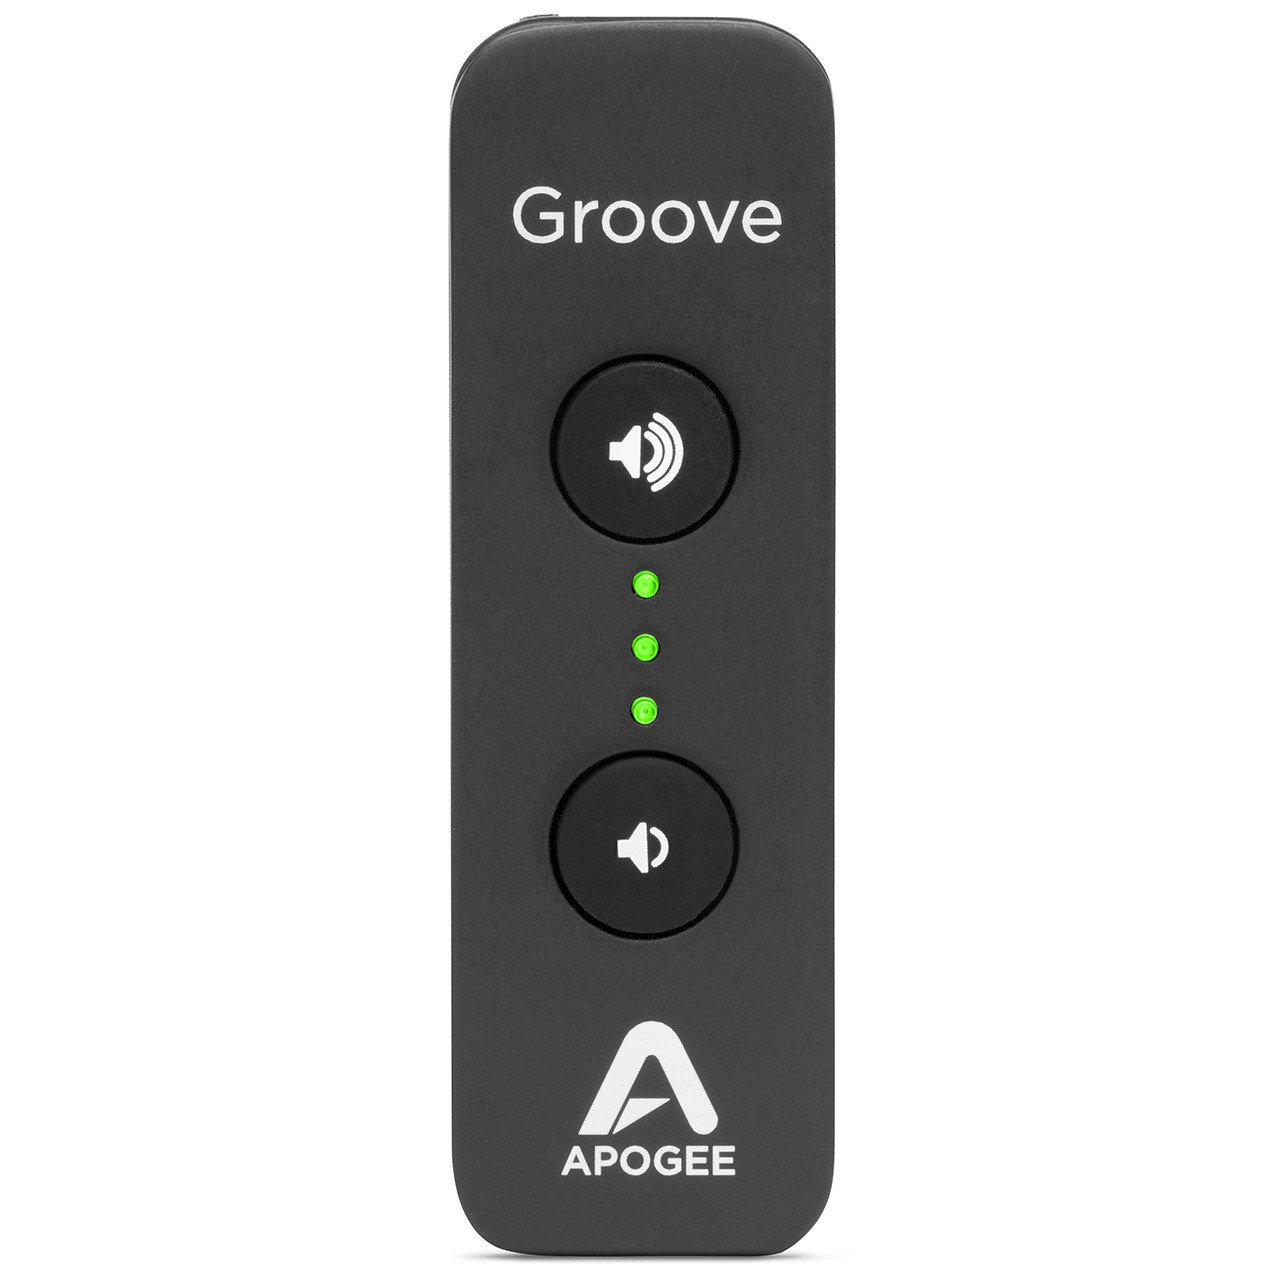 DACs - Apogee Groove Portable USB DAC And Headphone Amp For Mac And PC